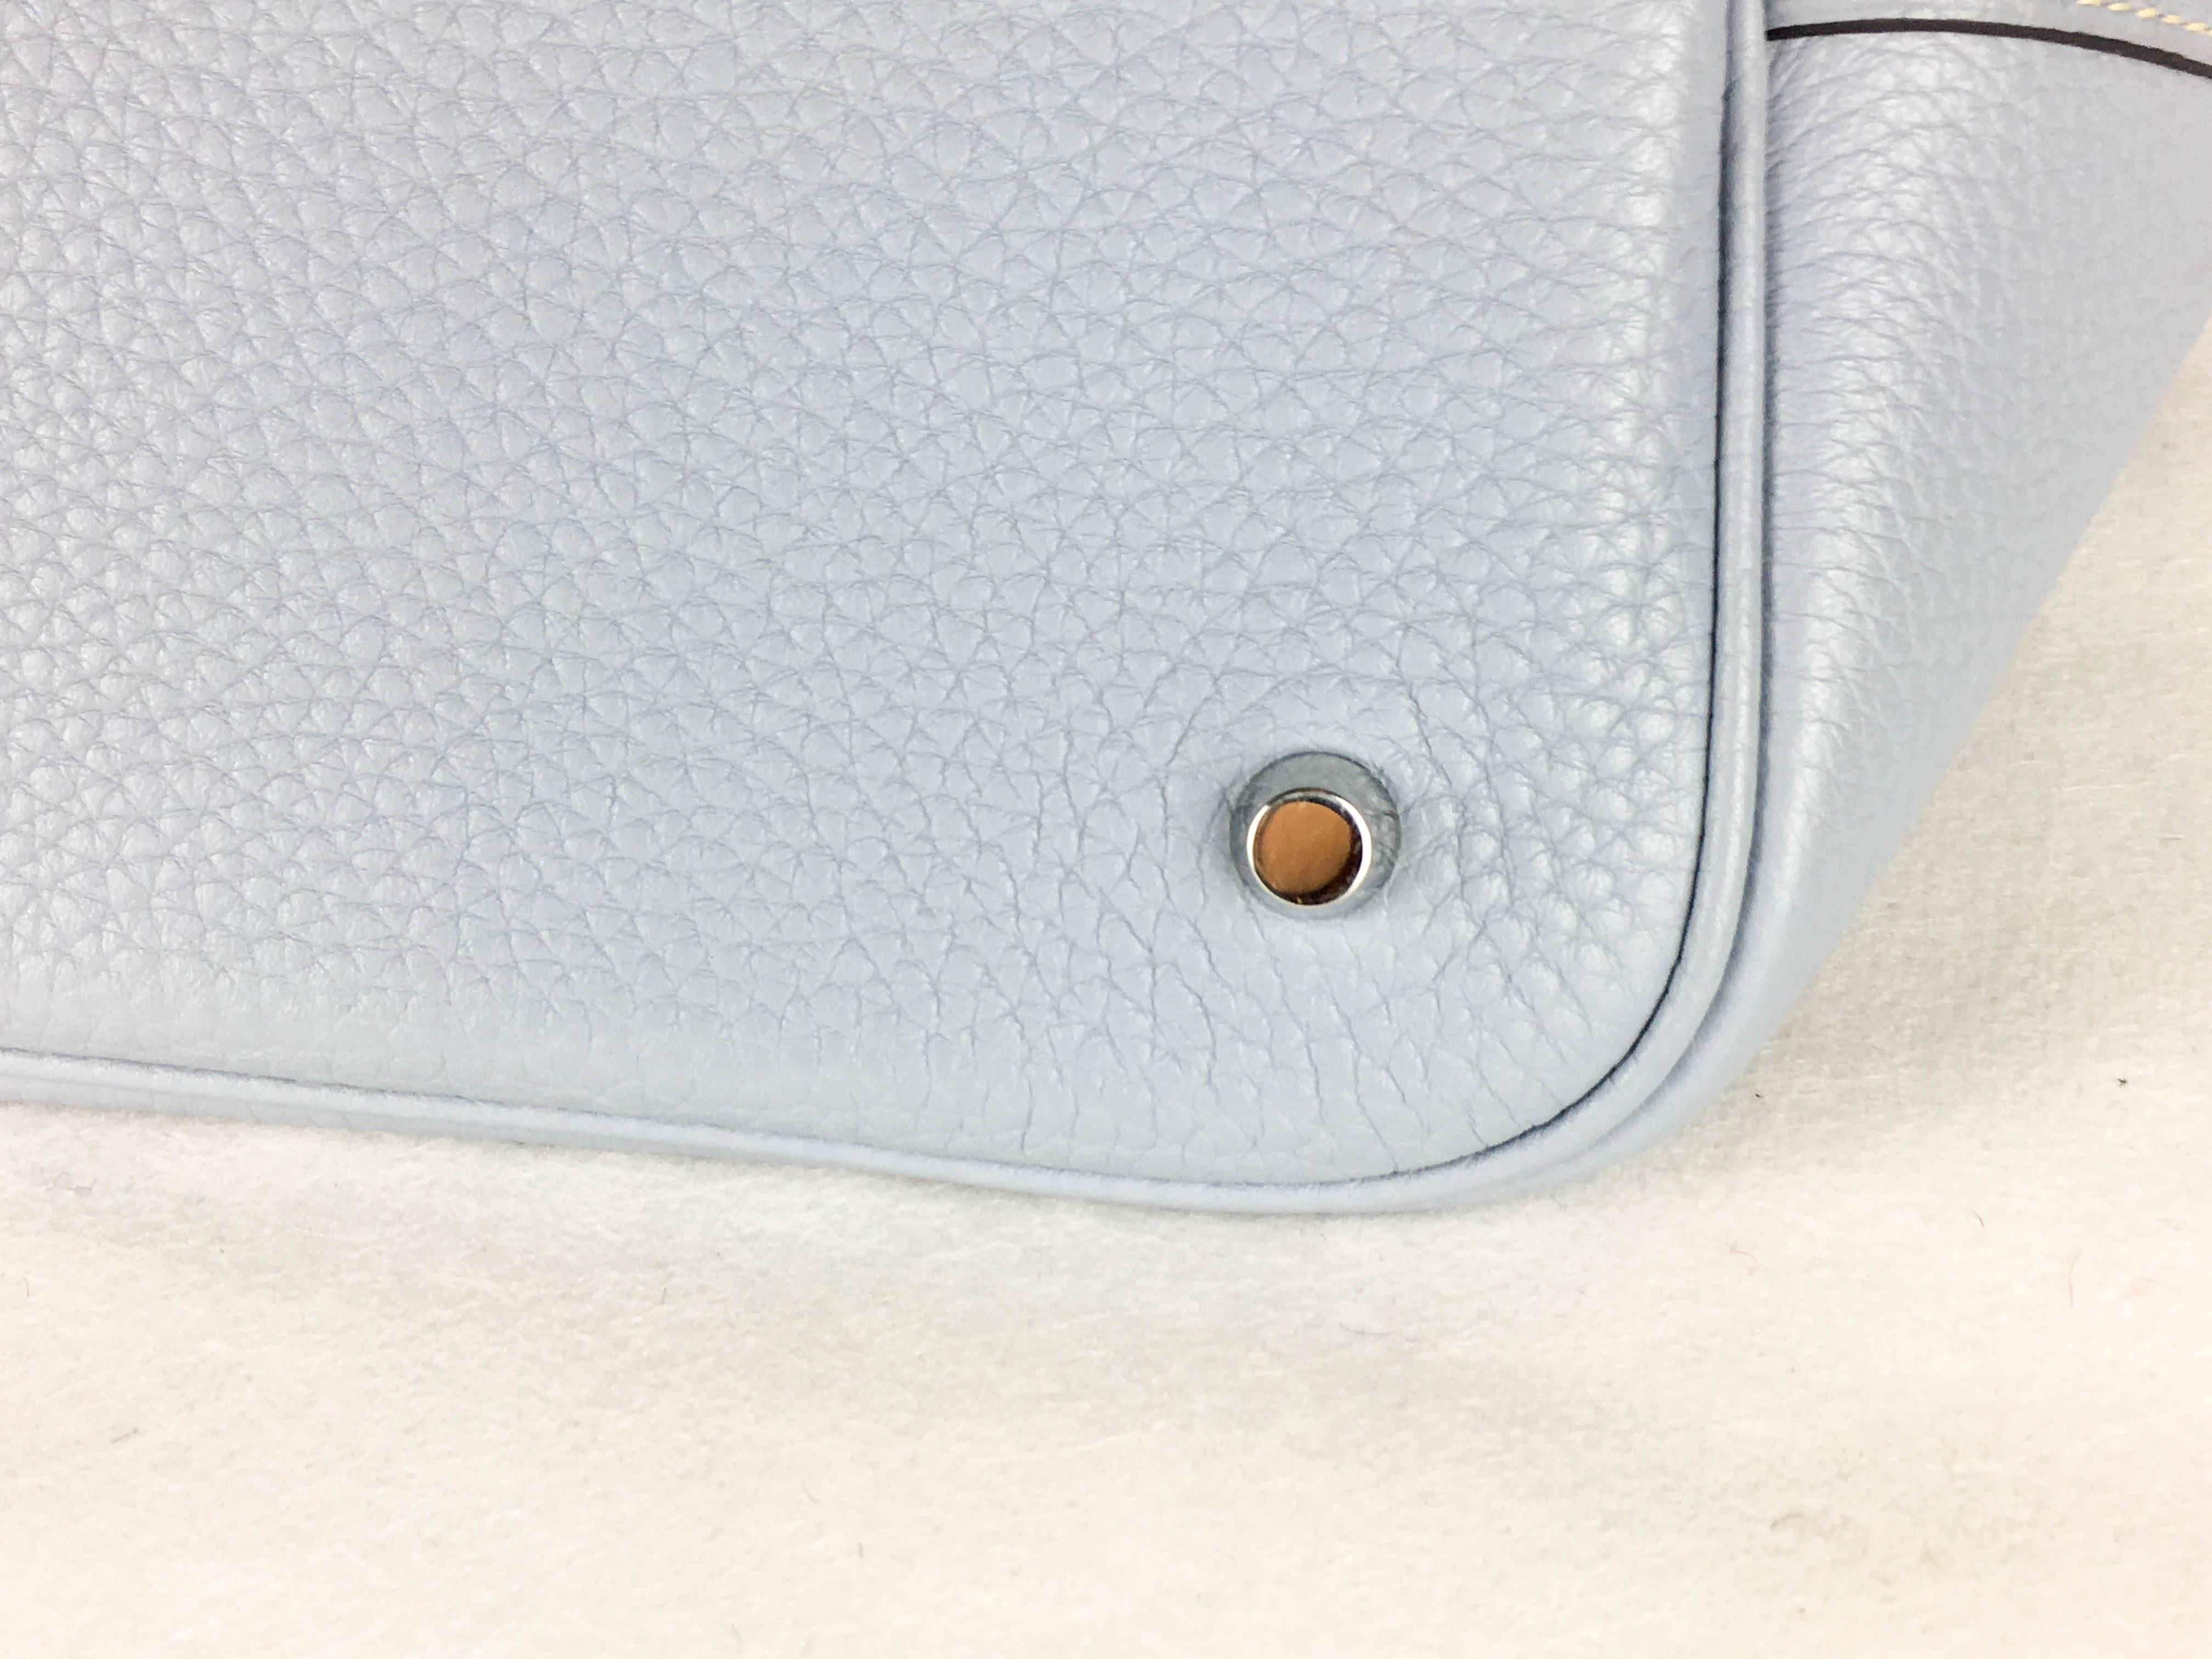 Women's 2014 Hermes Picotin 22 Handbag in Pale Blue Clemence Leather For Sale